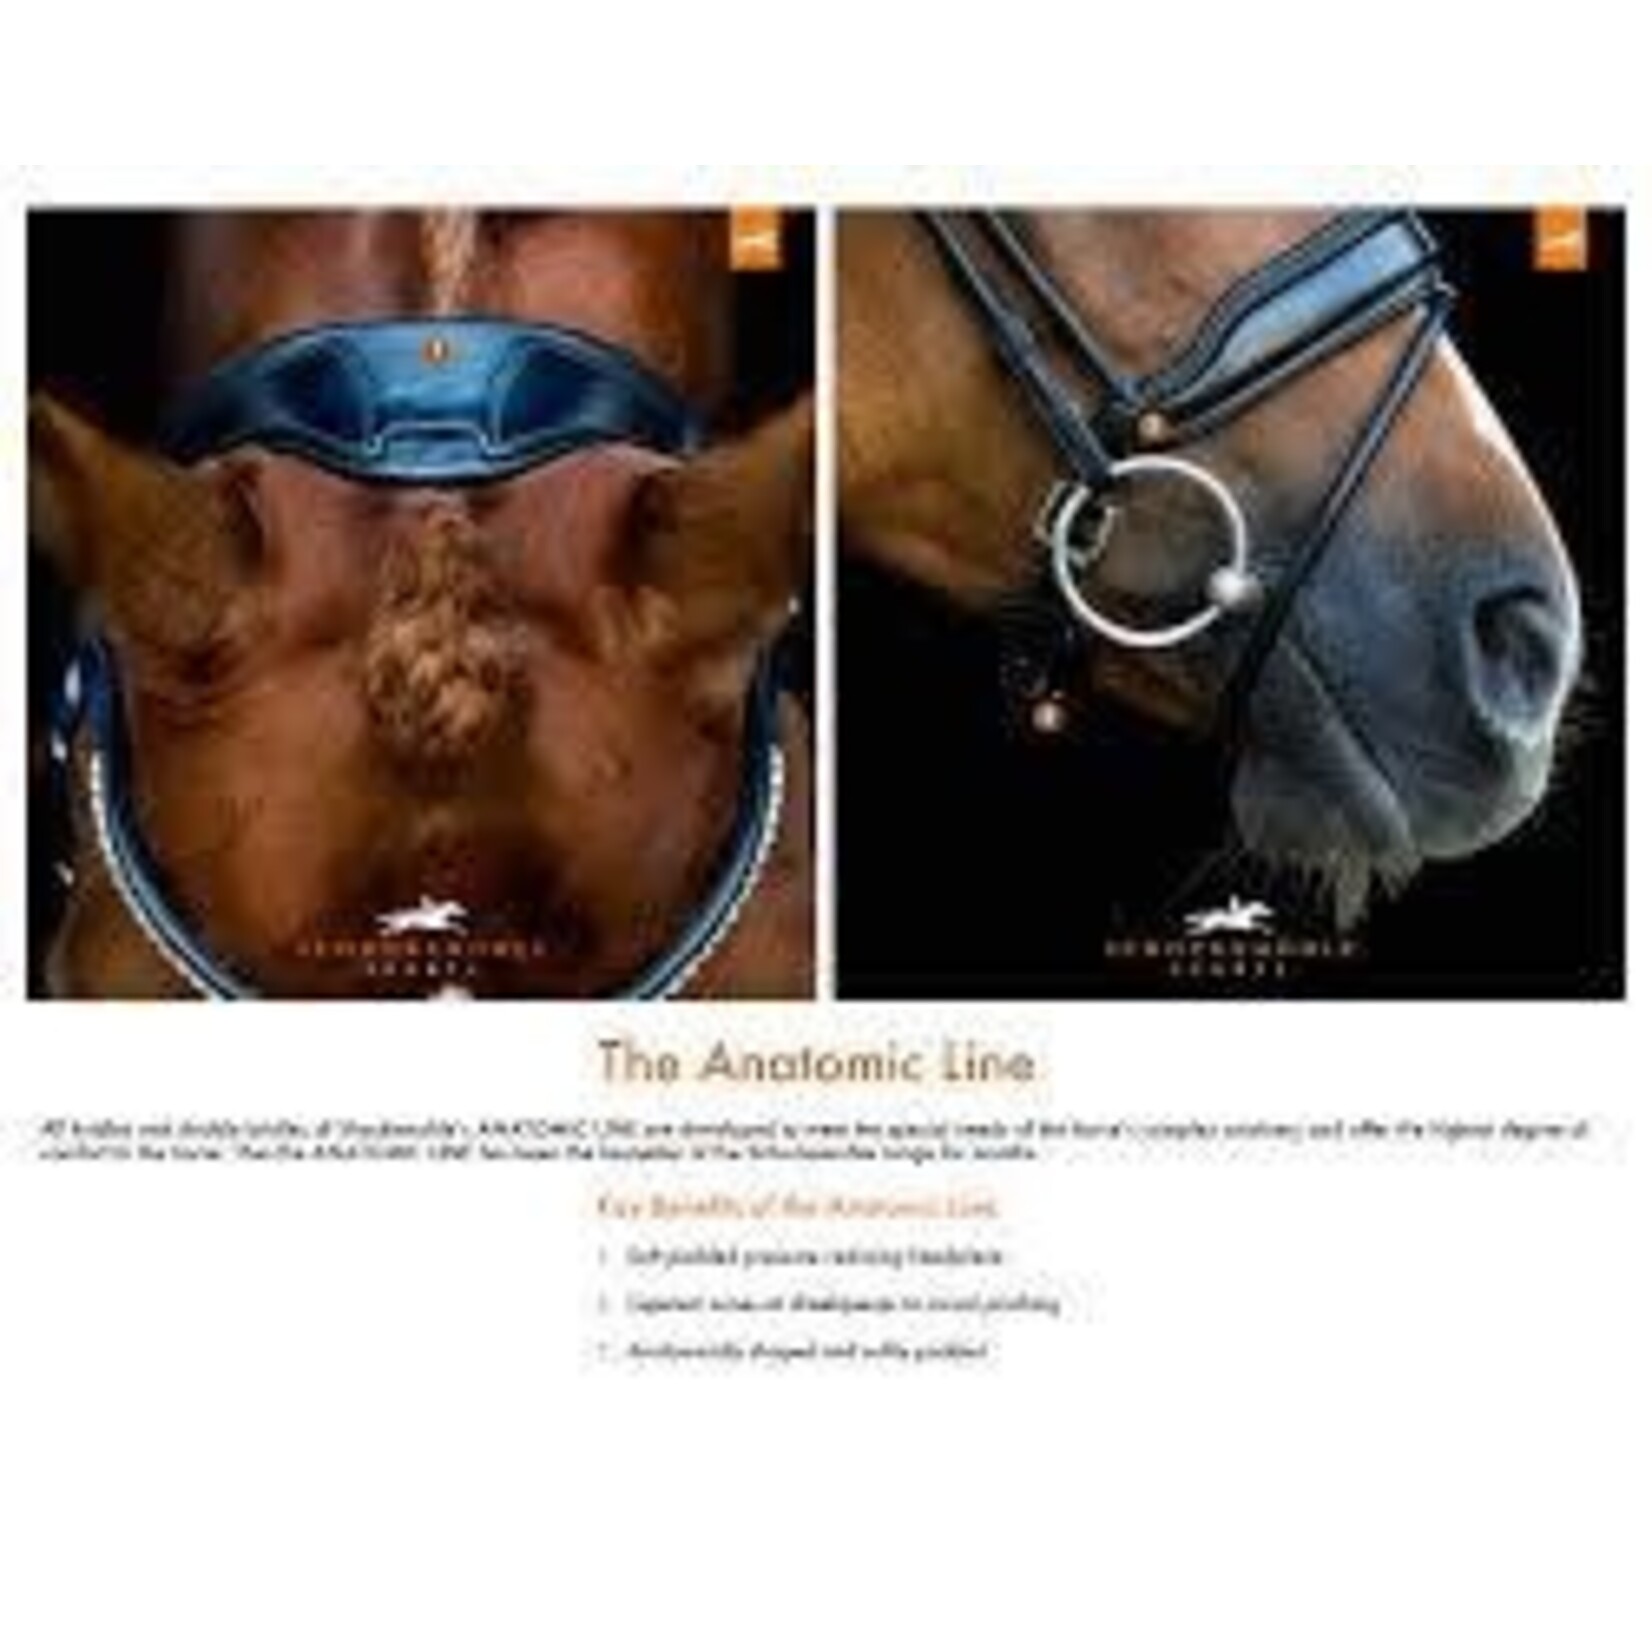 1111-00010 Schockemohle Milan Anatomic Double Bridle, Padded with Silver Hardware, includes two browbands: leather and crystal